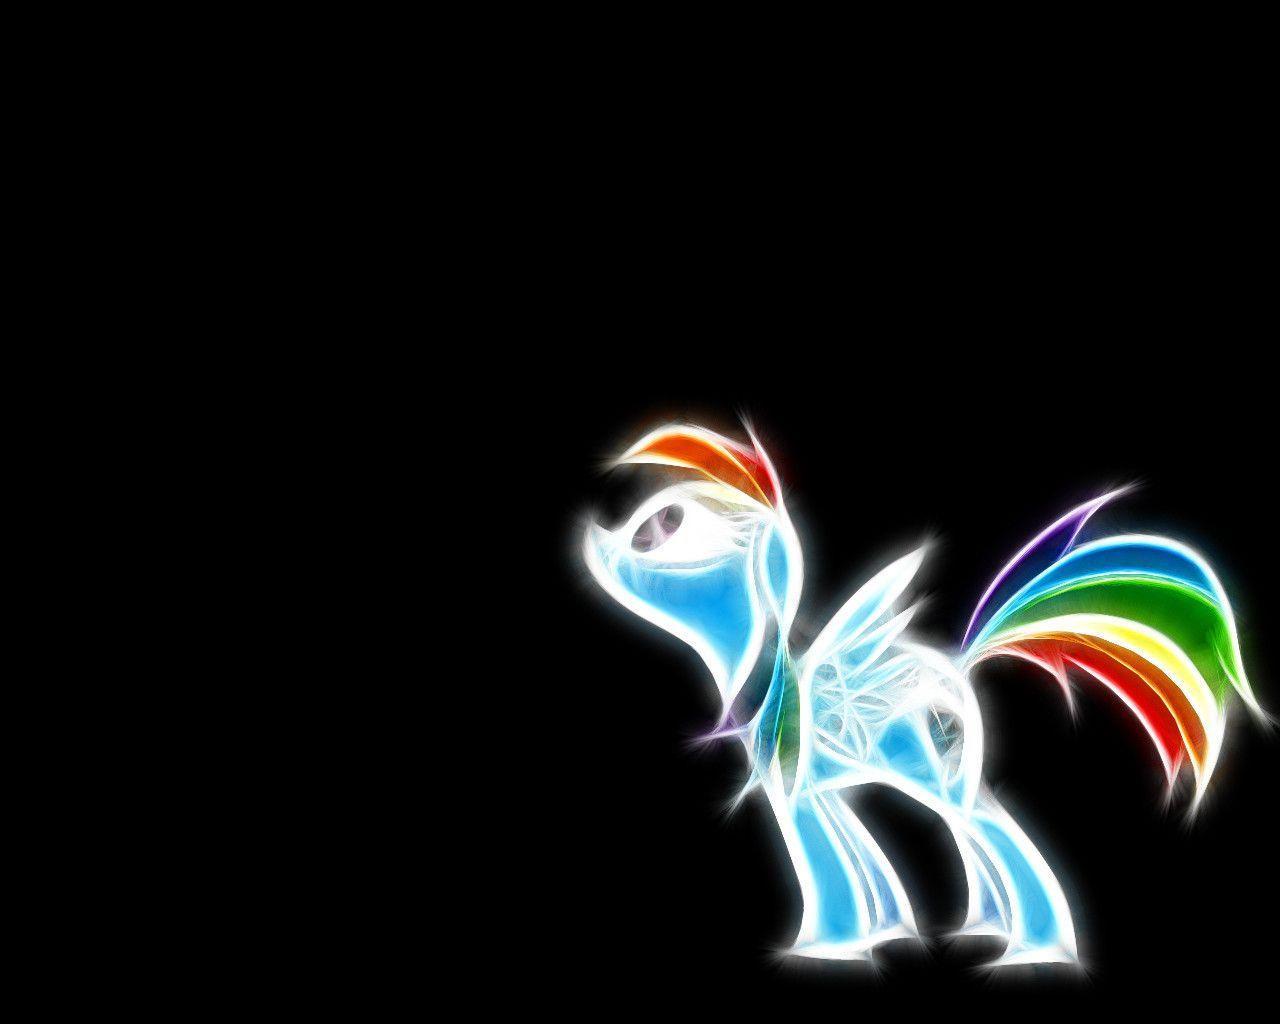 My Little Pony Android Wallpaper